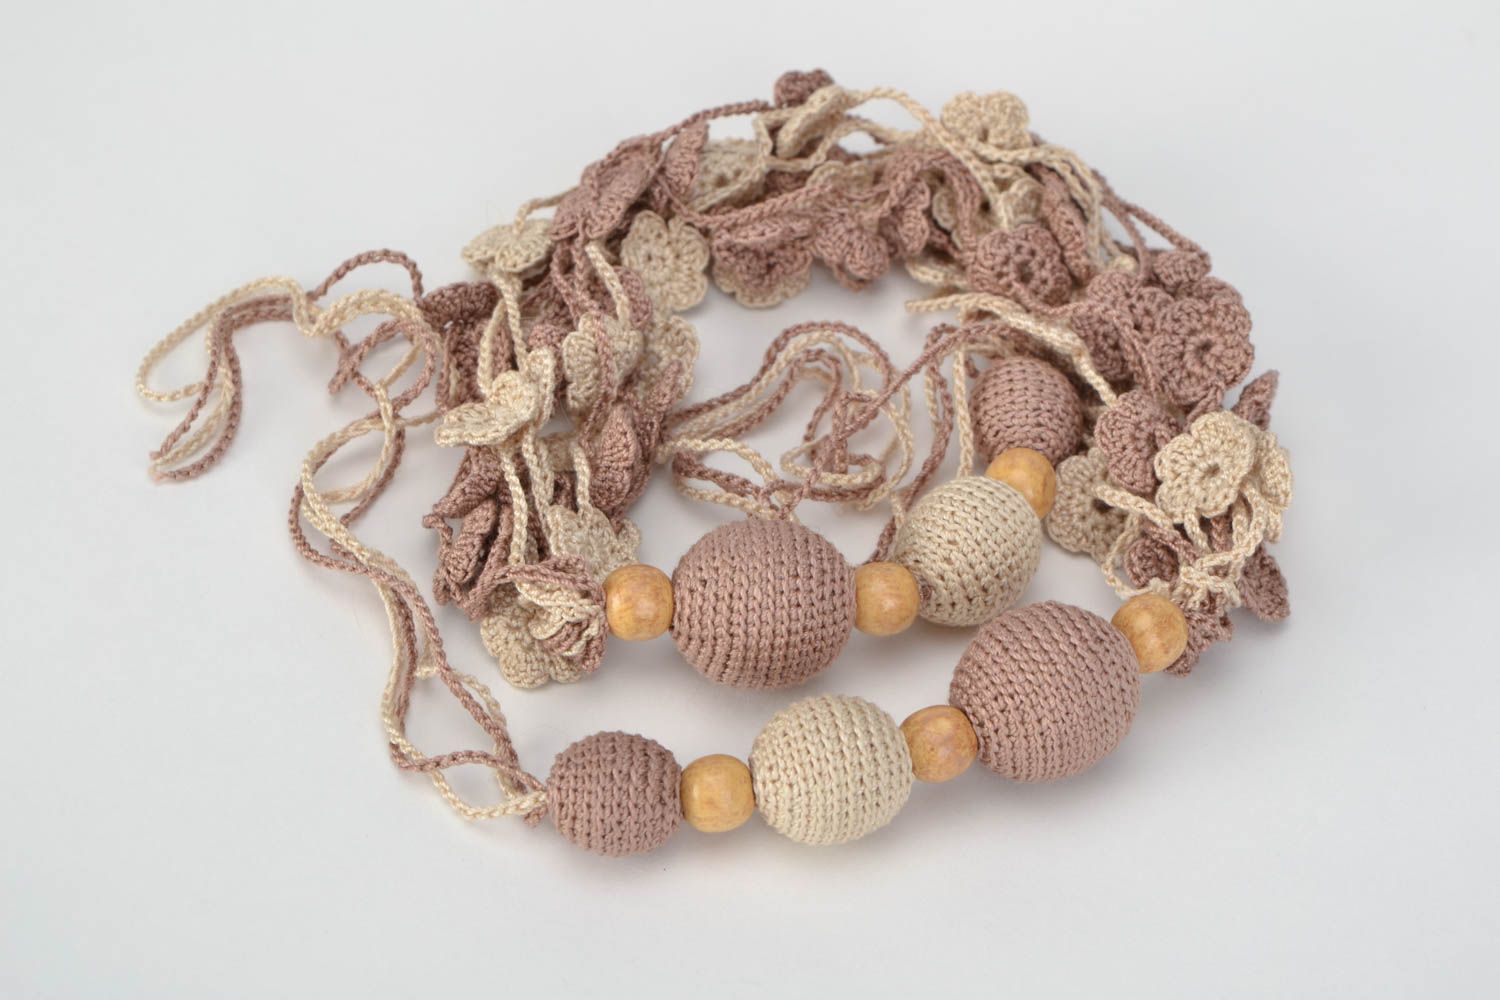 Handmade women's crochet necklace with wooden beads and flowers photo 5